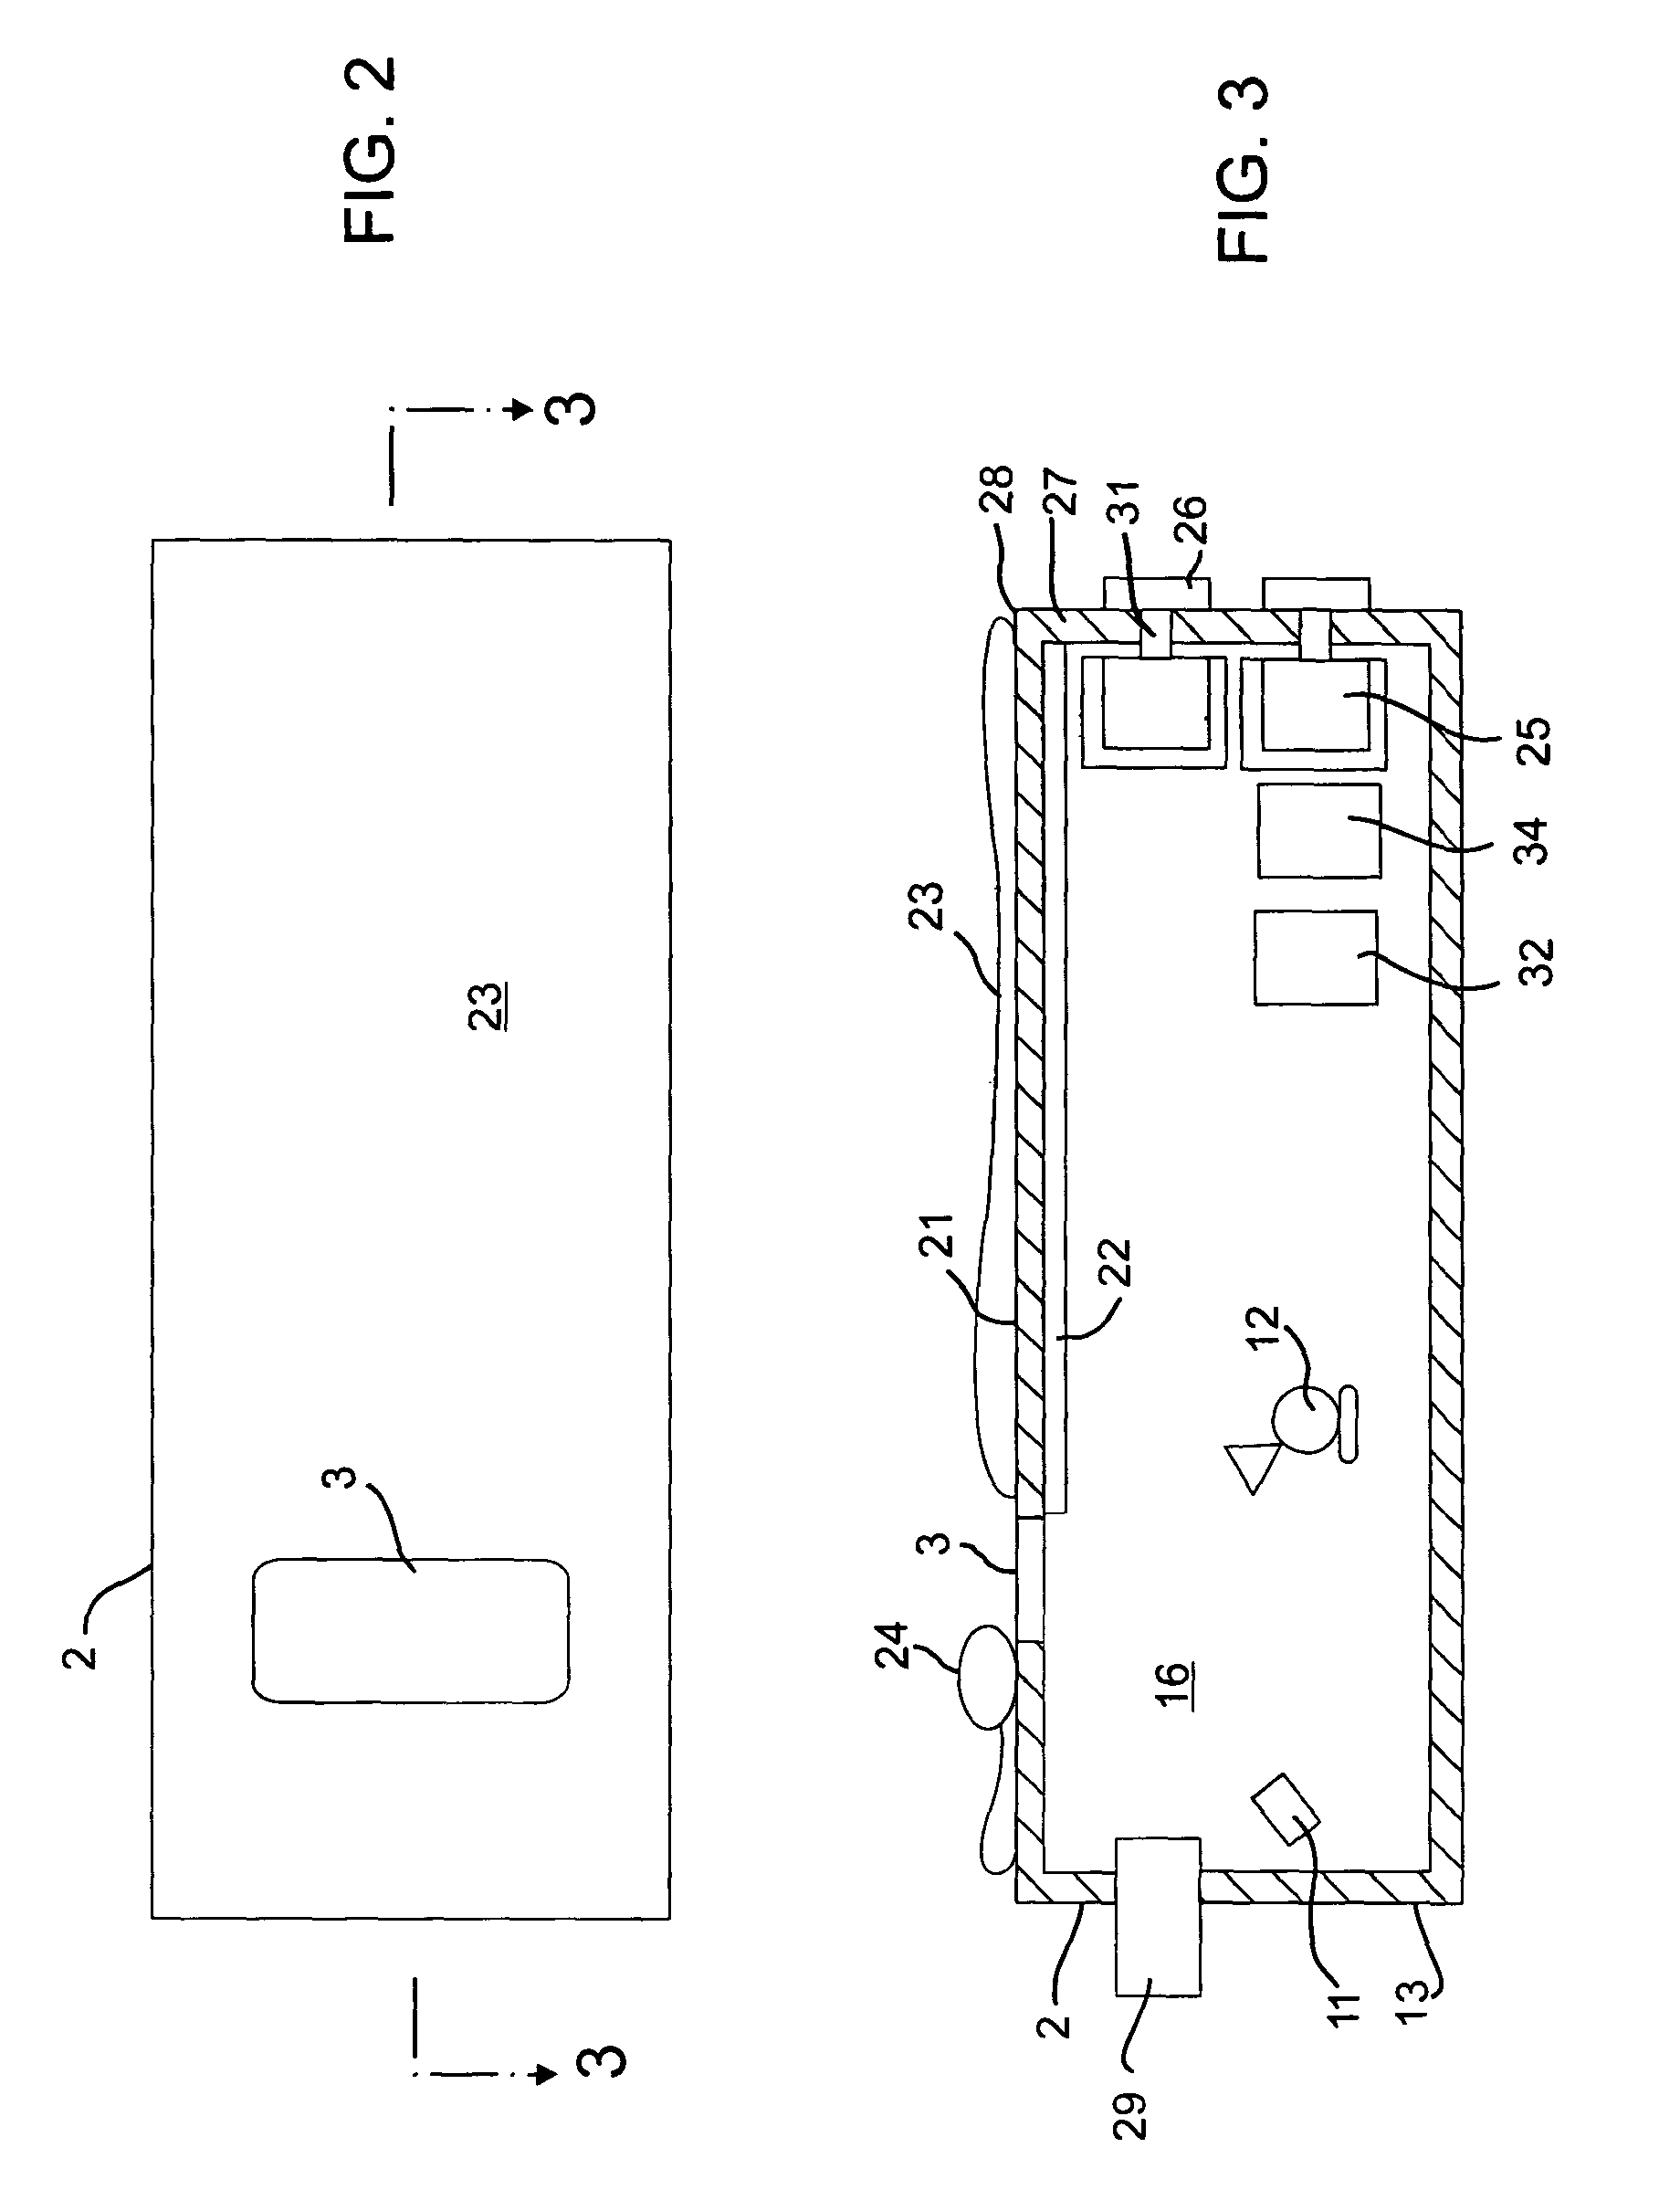 Apparatus and method for diagnosing breast cancer including examination table